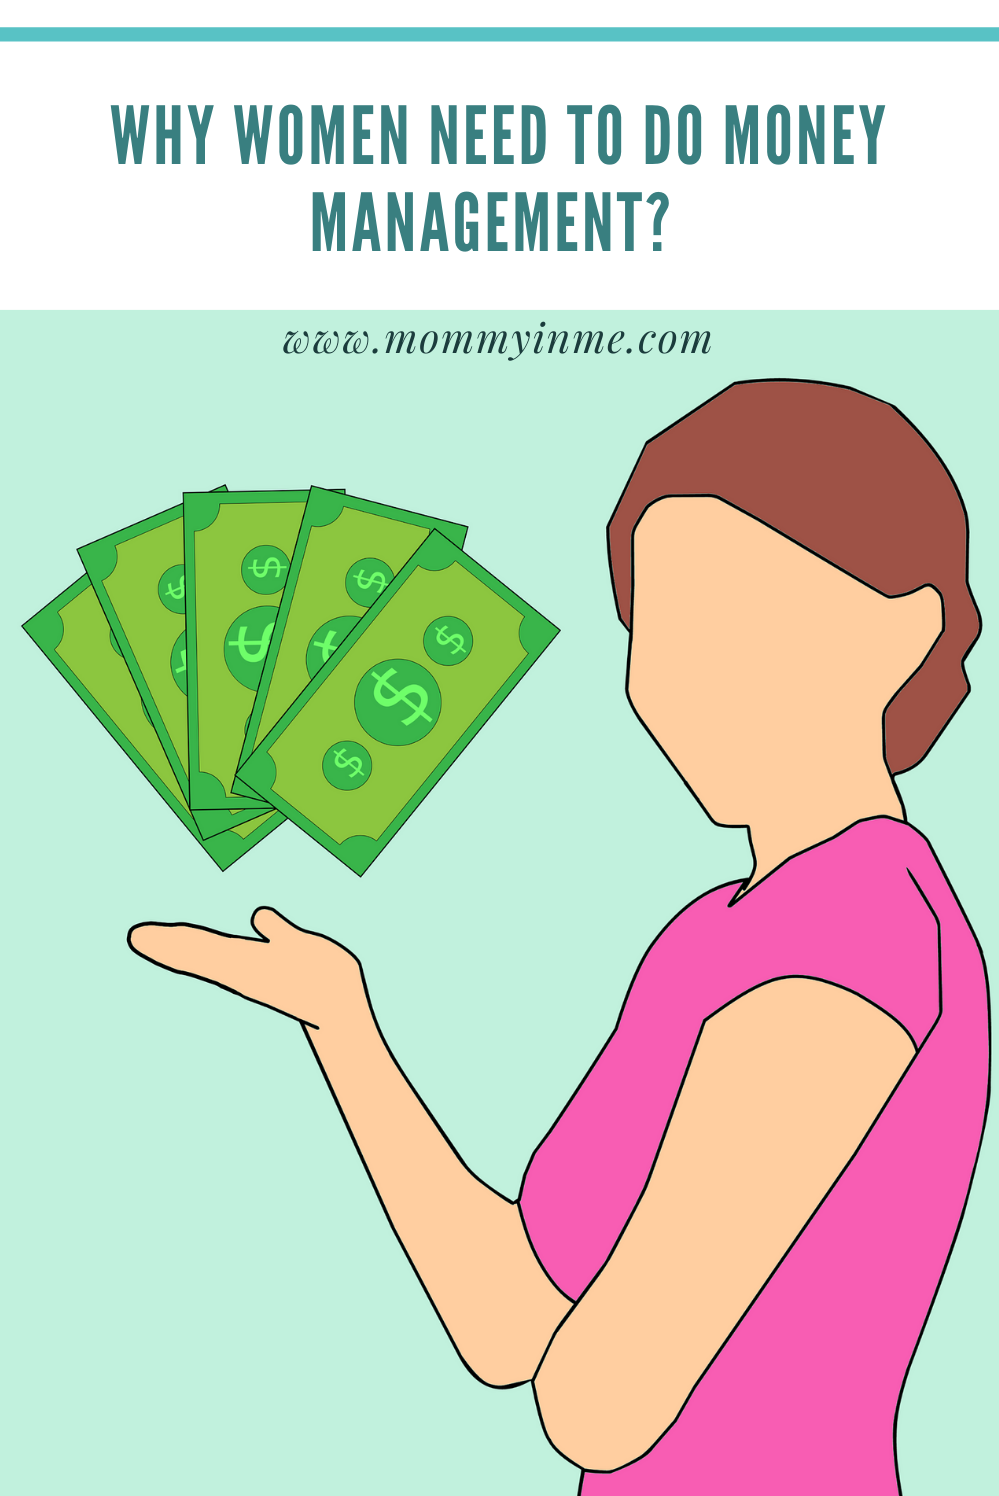 It's time that Indian women handle their finances and actively participate in Financial Planning to lead the life of their choice. Finance Blog by women #financialliteracy #moneymanagement #womenandfinance #financialdecision #decisionmaker #investmentoptions